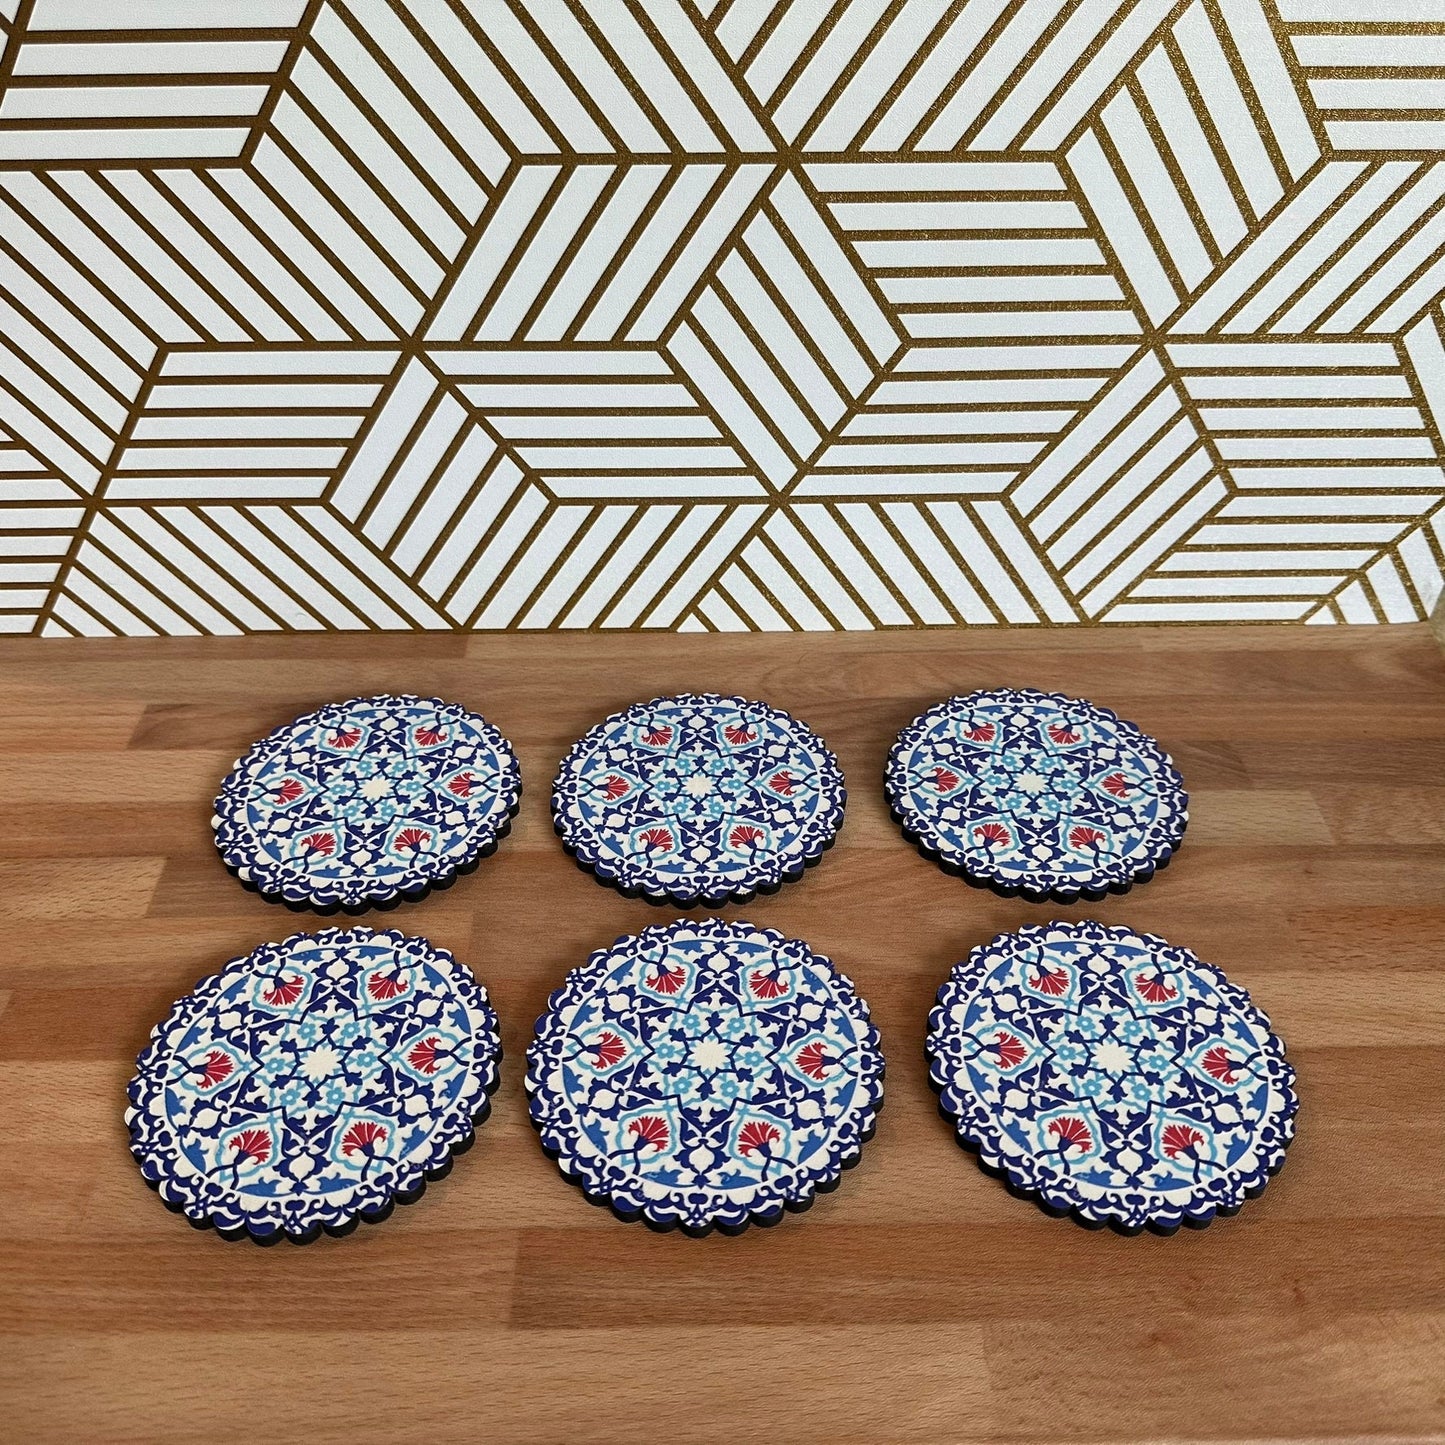 6 Pack Turkish Wooden Coaster Set with Holder - Blue and Red Floral Mandala -- Made in Turkey -- Quick Ship